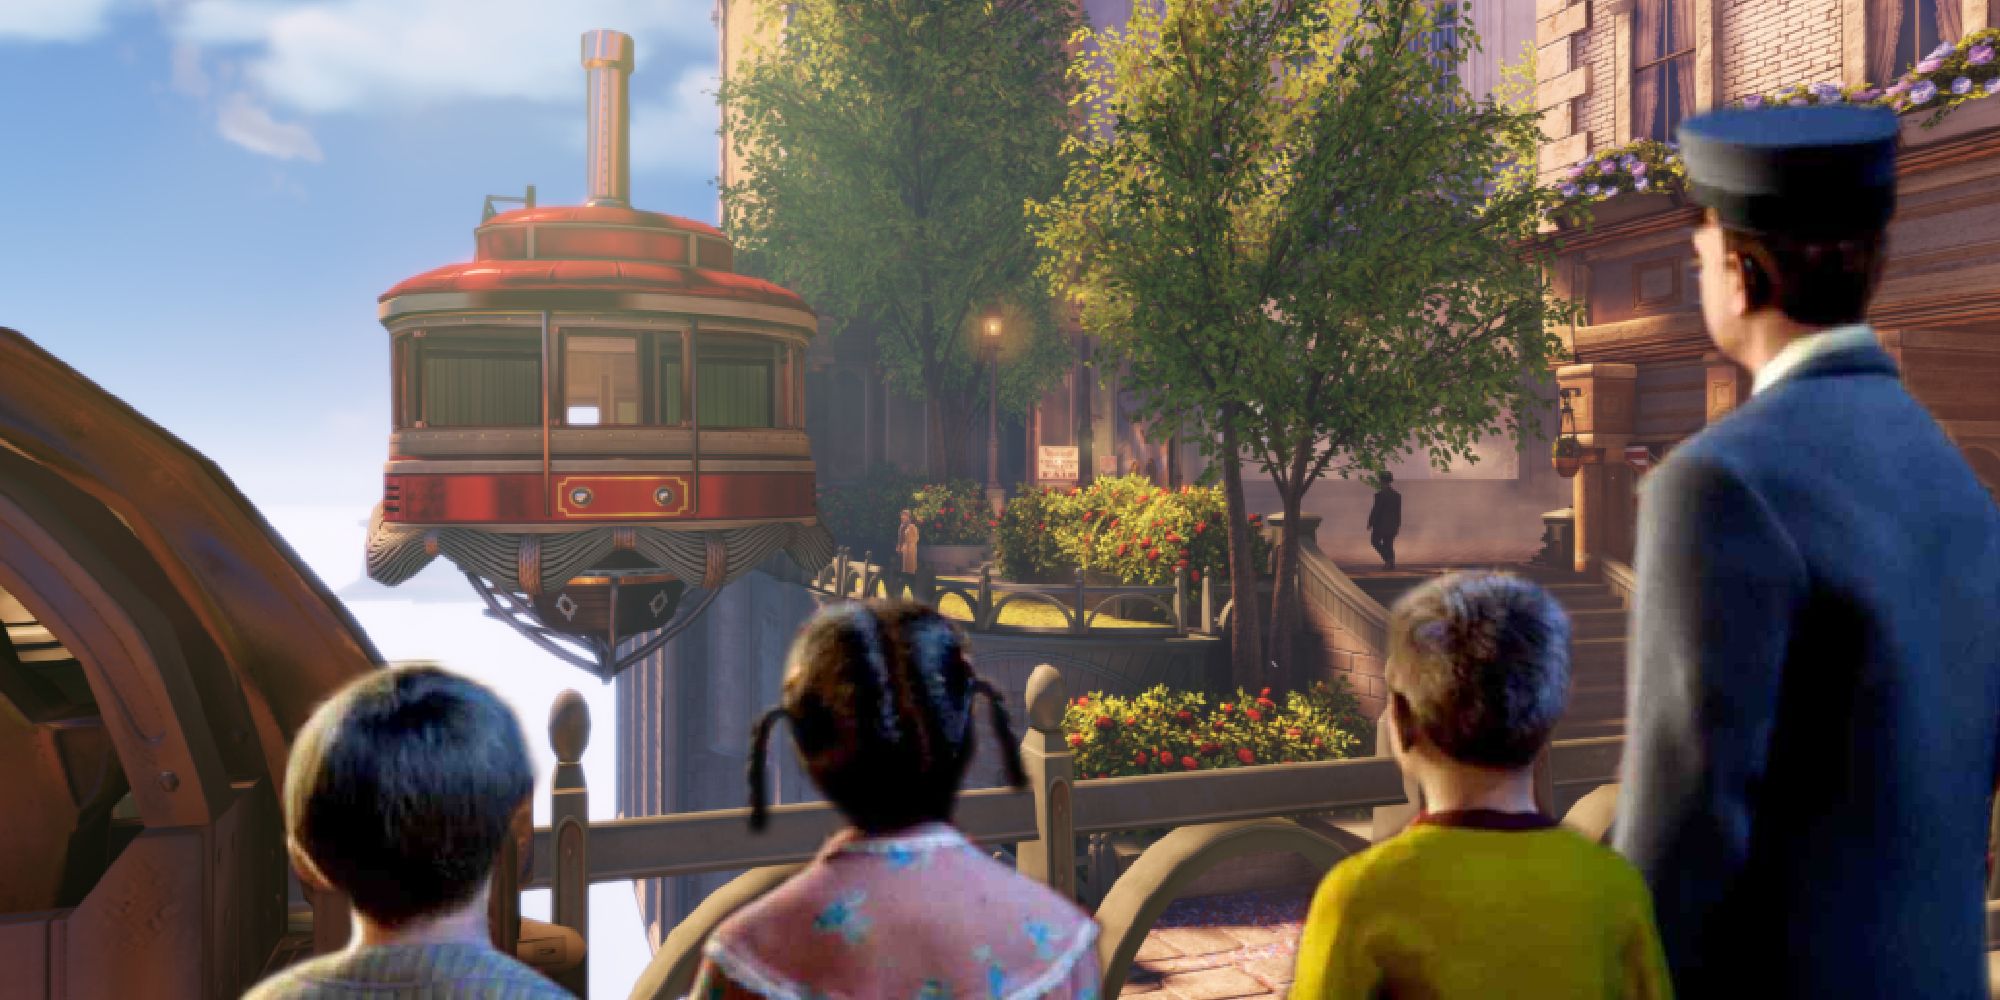 The cast of The Polar Express looking at BioShock Infinite's Columbia